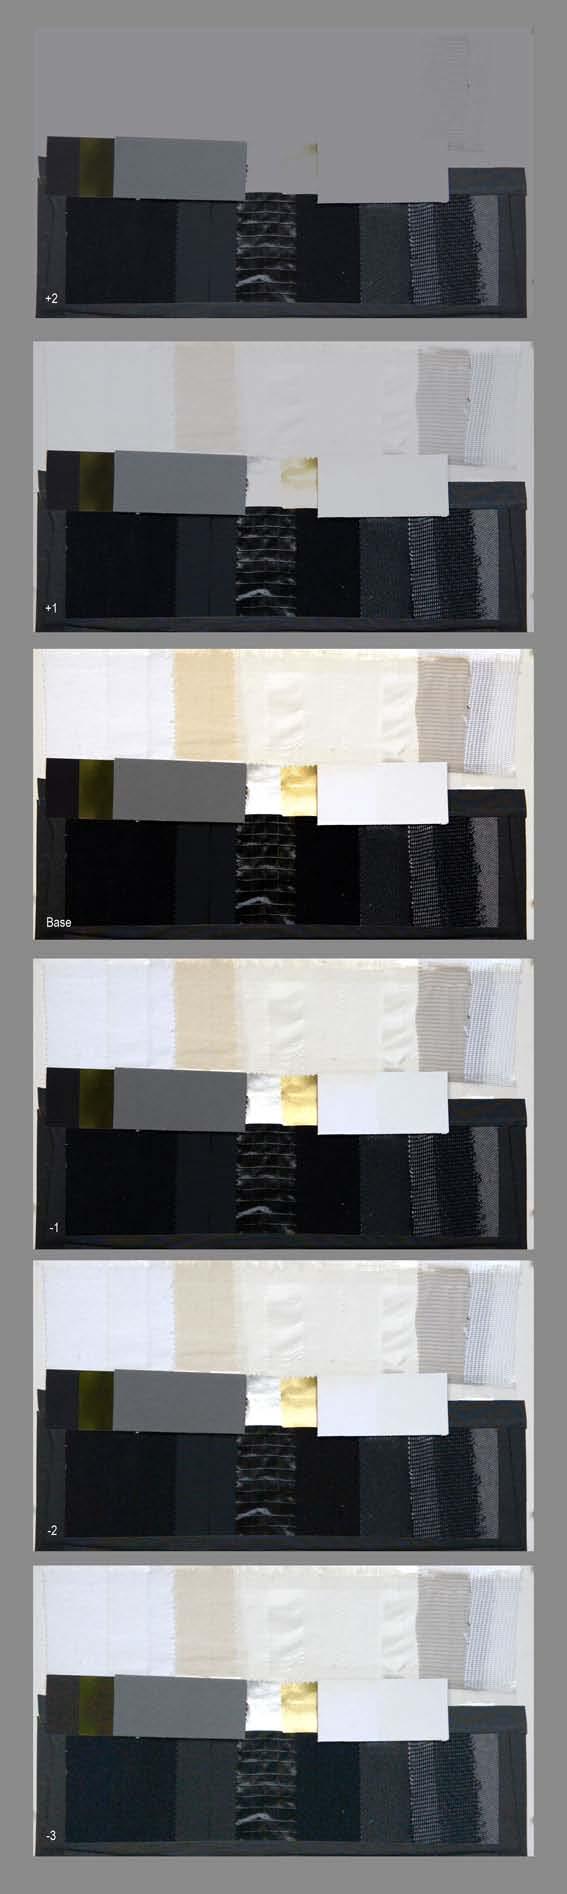 Reflectance values from the different samples regarding middle gray Let s see the exposure strip on the left.